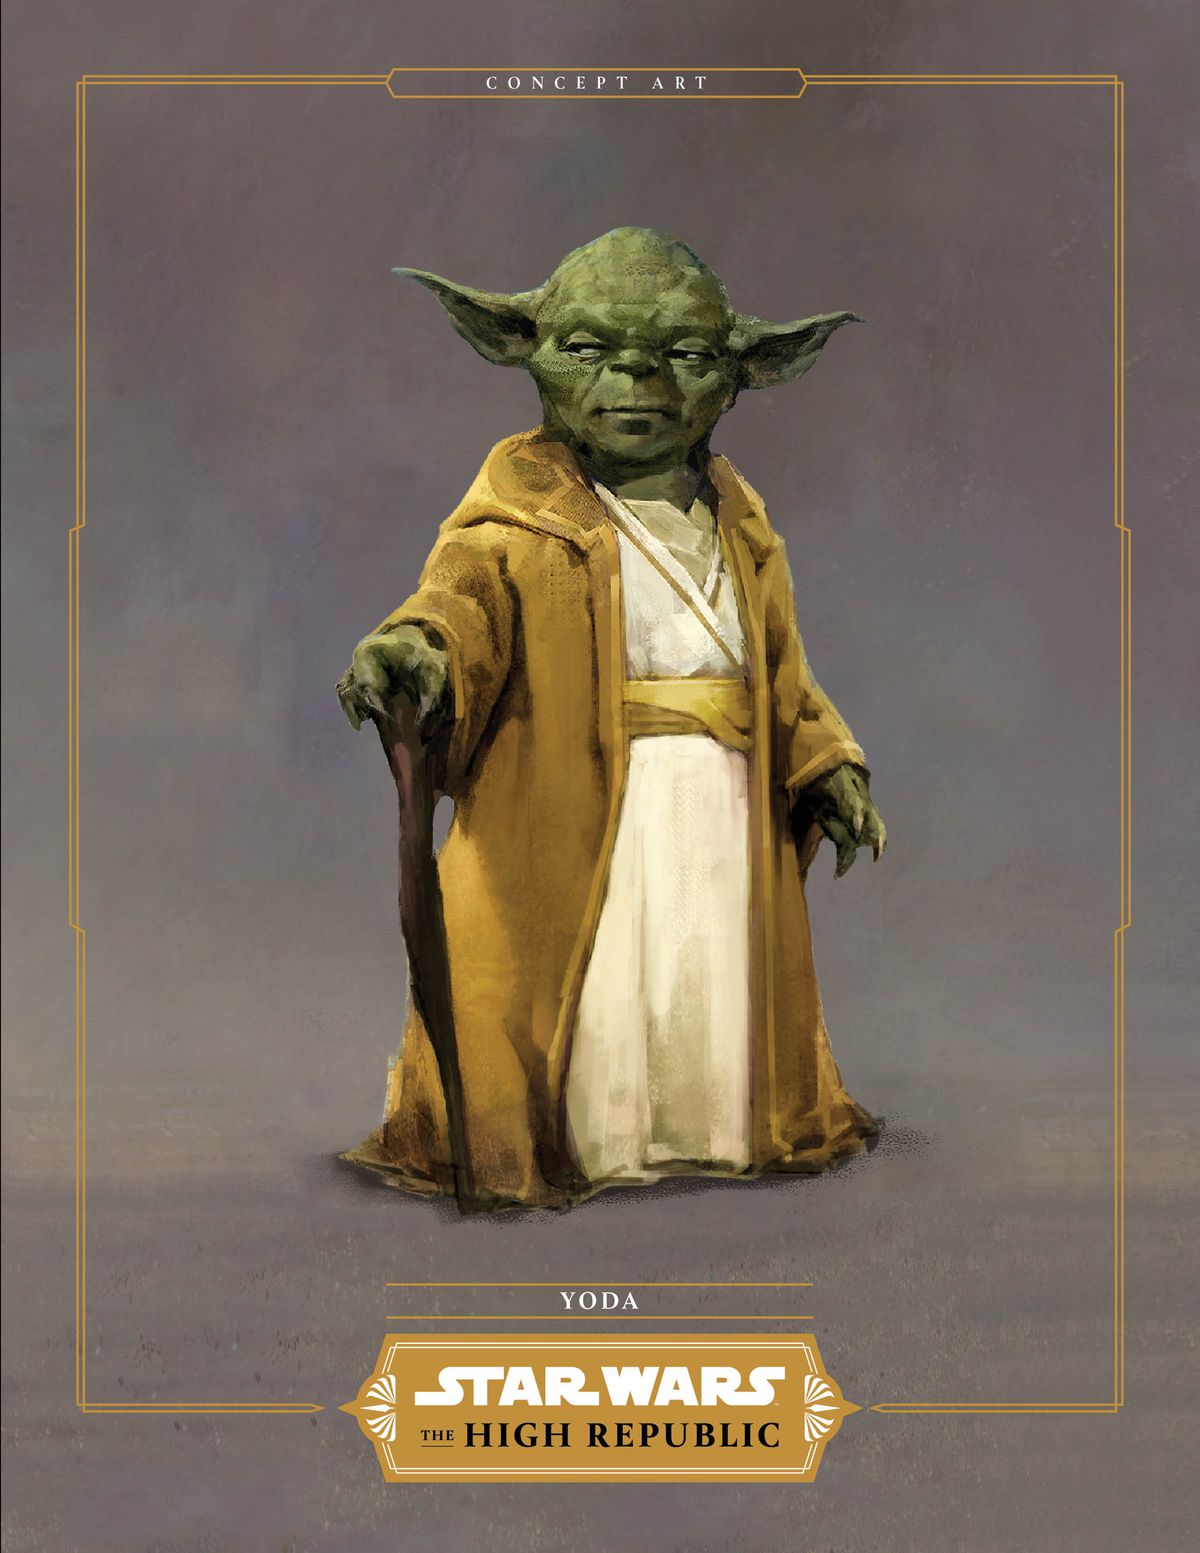 Yoda, with his wooden cane, in gold and white robes. 